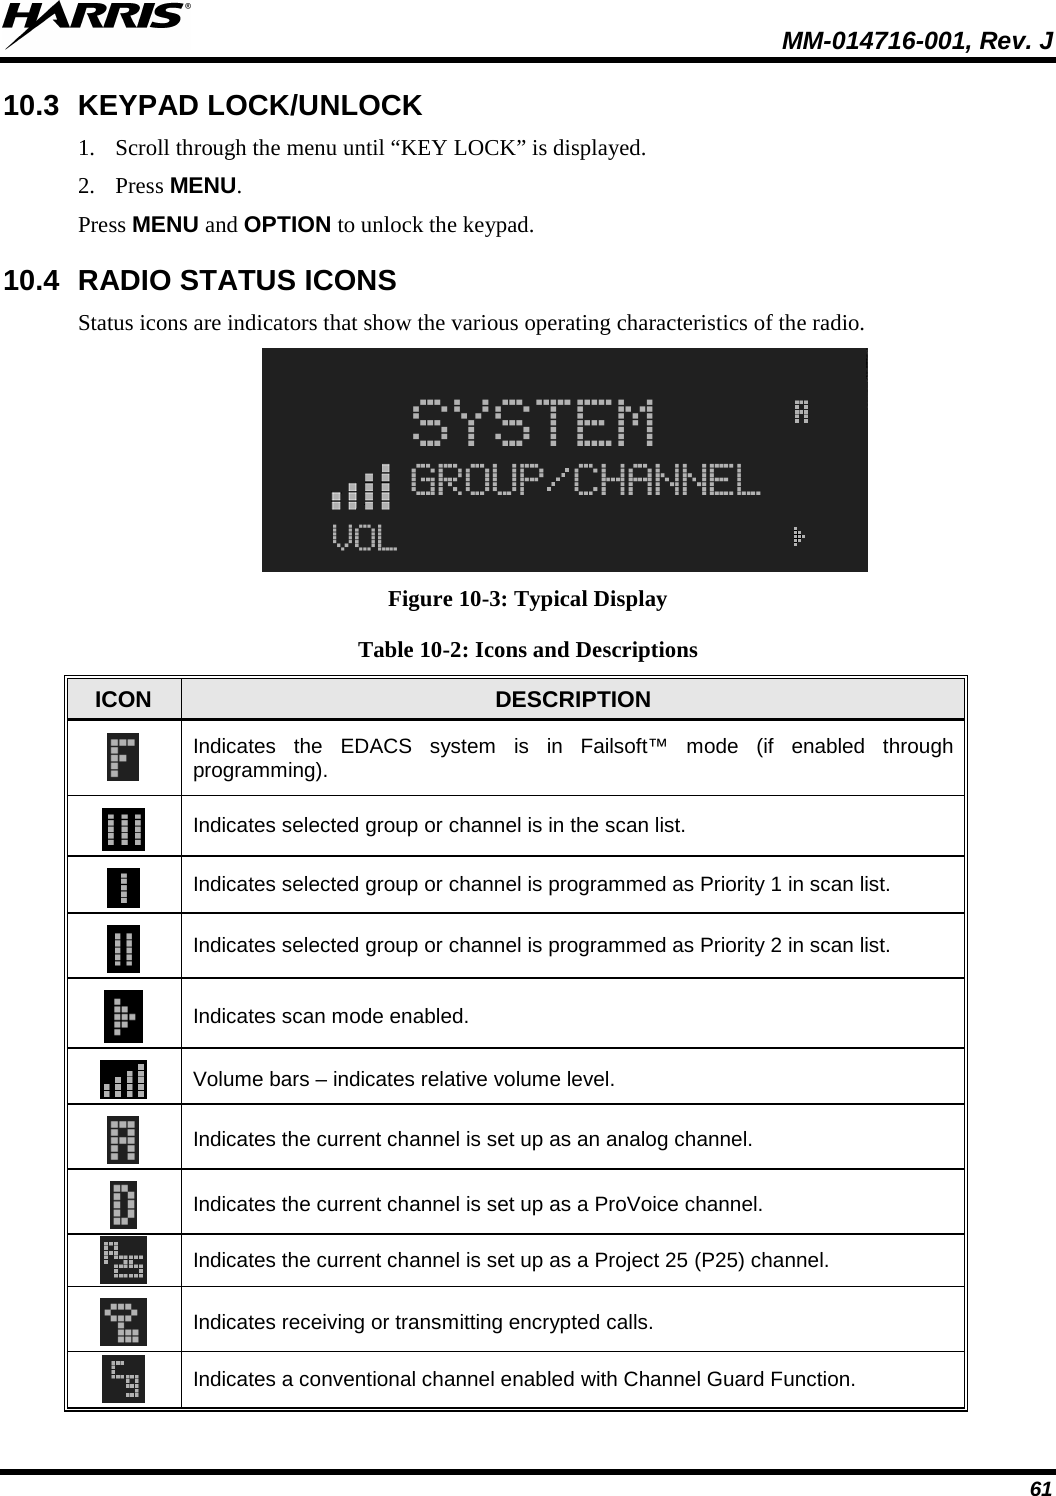  MM-014716-001, Rev. J 61 10.3 KEYPAD LOCK/UNLOCK  1. Scroll through the menu until “KEY LOCK” is displayed. 2. Press MENU. Press MENU and OPTION to unlock the keypad. 10.4 RADIO STATUS ICONS Status icons are indicators that show the various operating characteristics of the radio.    Figure 10-3: Typical Display Table 10-2: Icons and Descriptions ICON DESCRIPTION  Indicates the EDACS system is in Failsoft™ mode (if enabled through programming).   Indicates selected group or channel is in the scan list.  Indicates selected group or channel is programmed as Priority 1 in scan list.  Indicates selected group or channel is programmed as Priority 2 in scan list.  Indicates scan mode enabled.  Volume bars – indicates relative volume level.  Indicates the current channel is set up as an analog channel.  Indicates the current channel is set up as a ProVoice channel.  Indicates the current channel is set up as a Project 25 (P25) channel.  Indicates receiving or transmitting encrypted calls.  Indicates a conventional channel enabled with Channel Guard Function. 